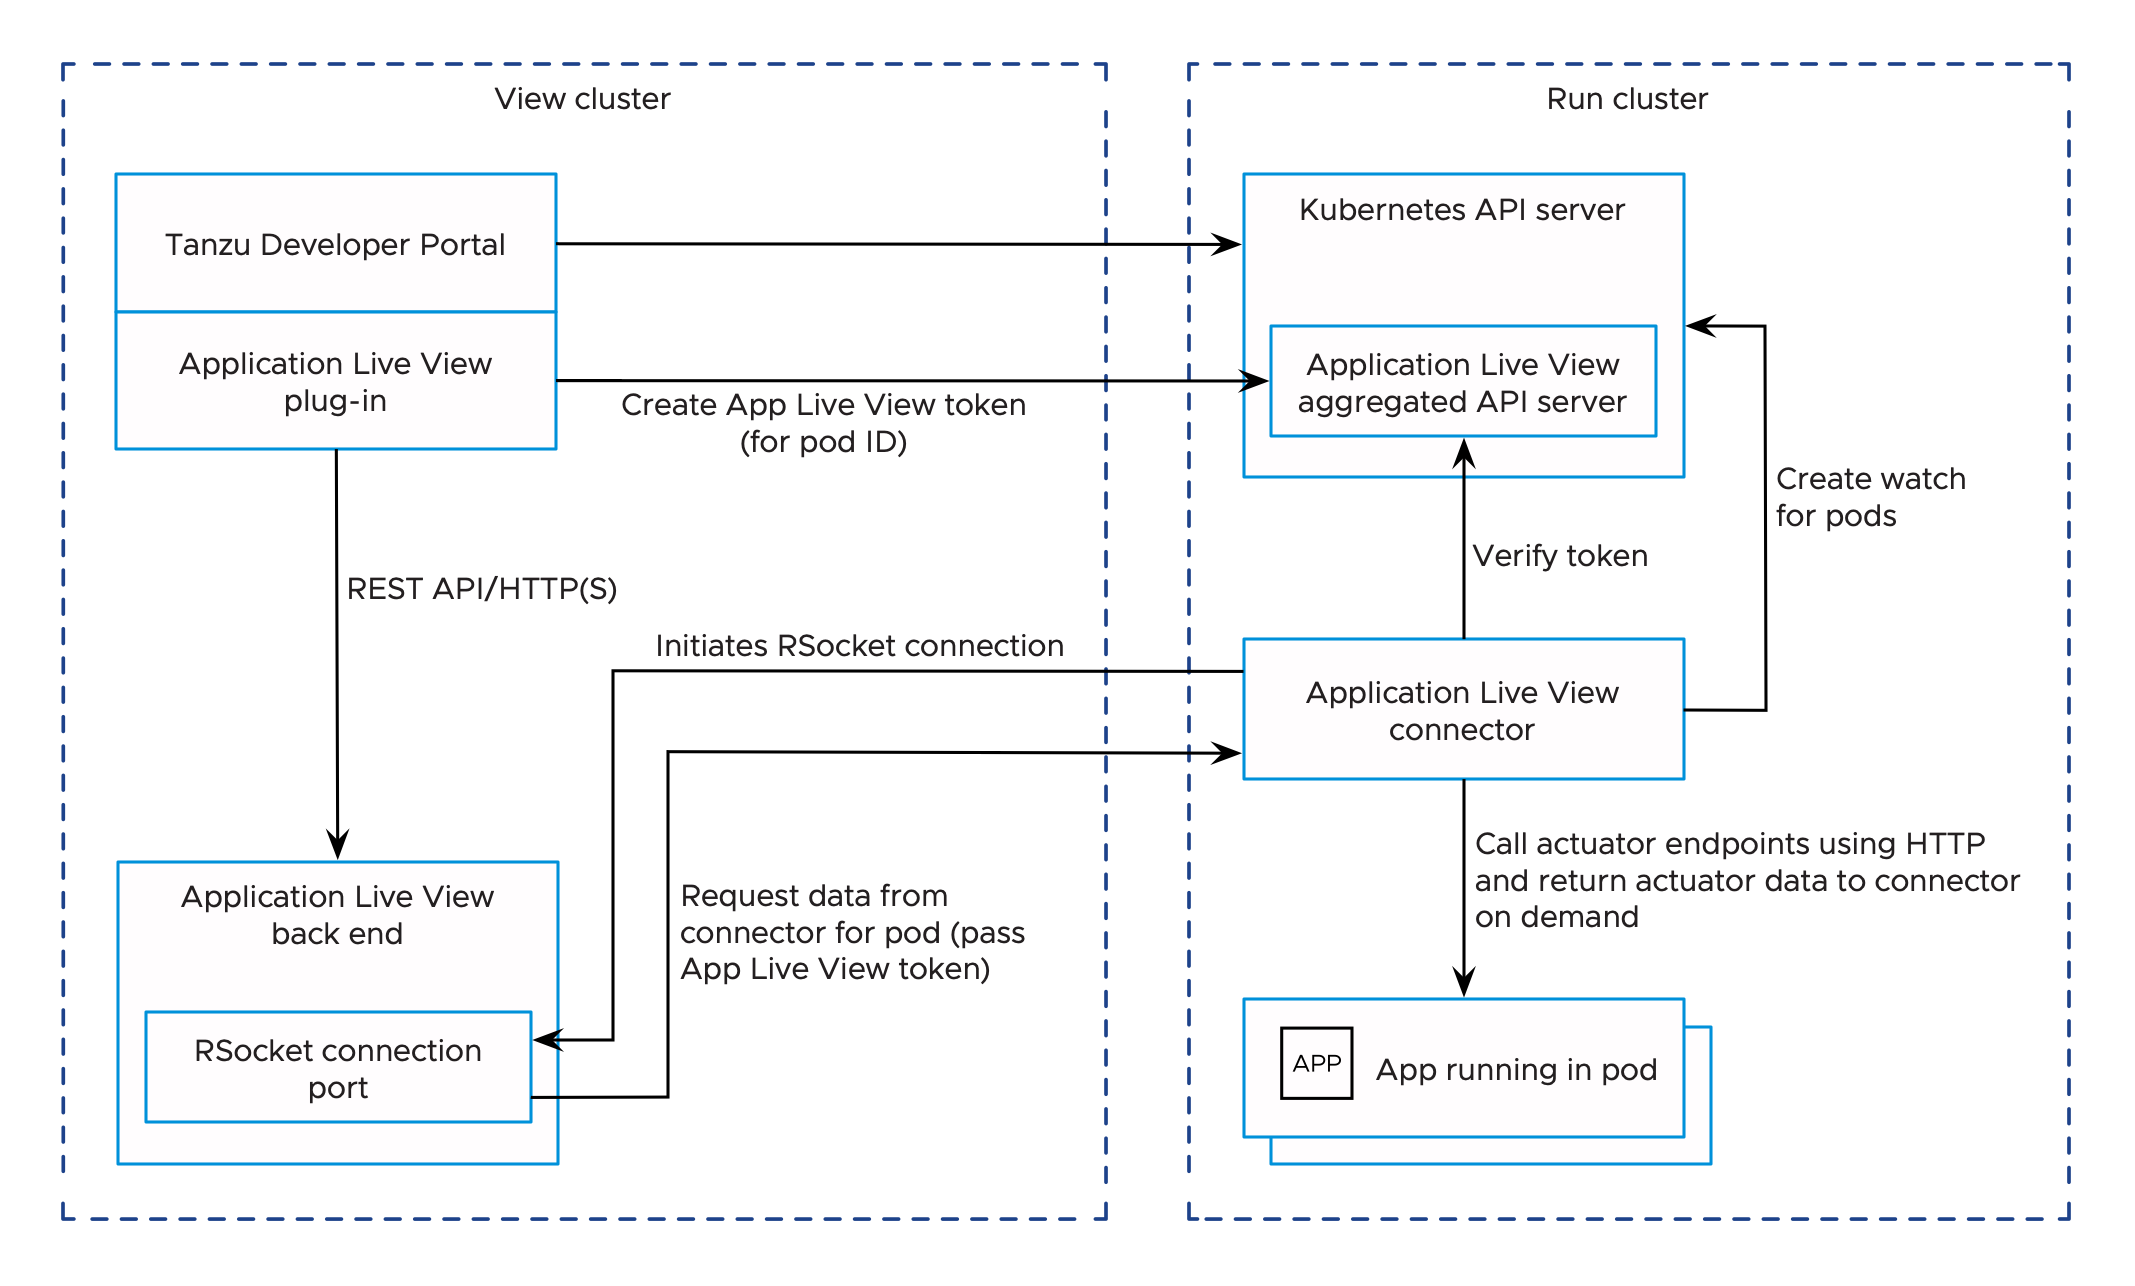 Diagram of the security and access control process described in this section.